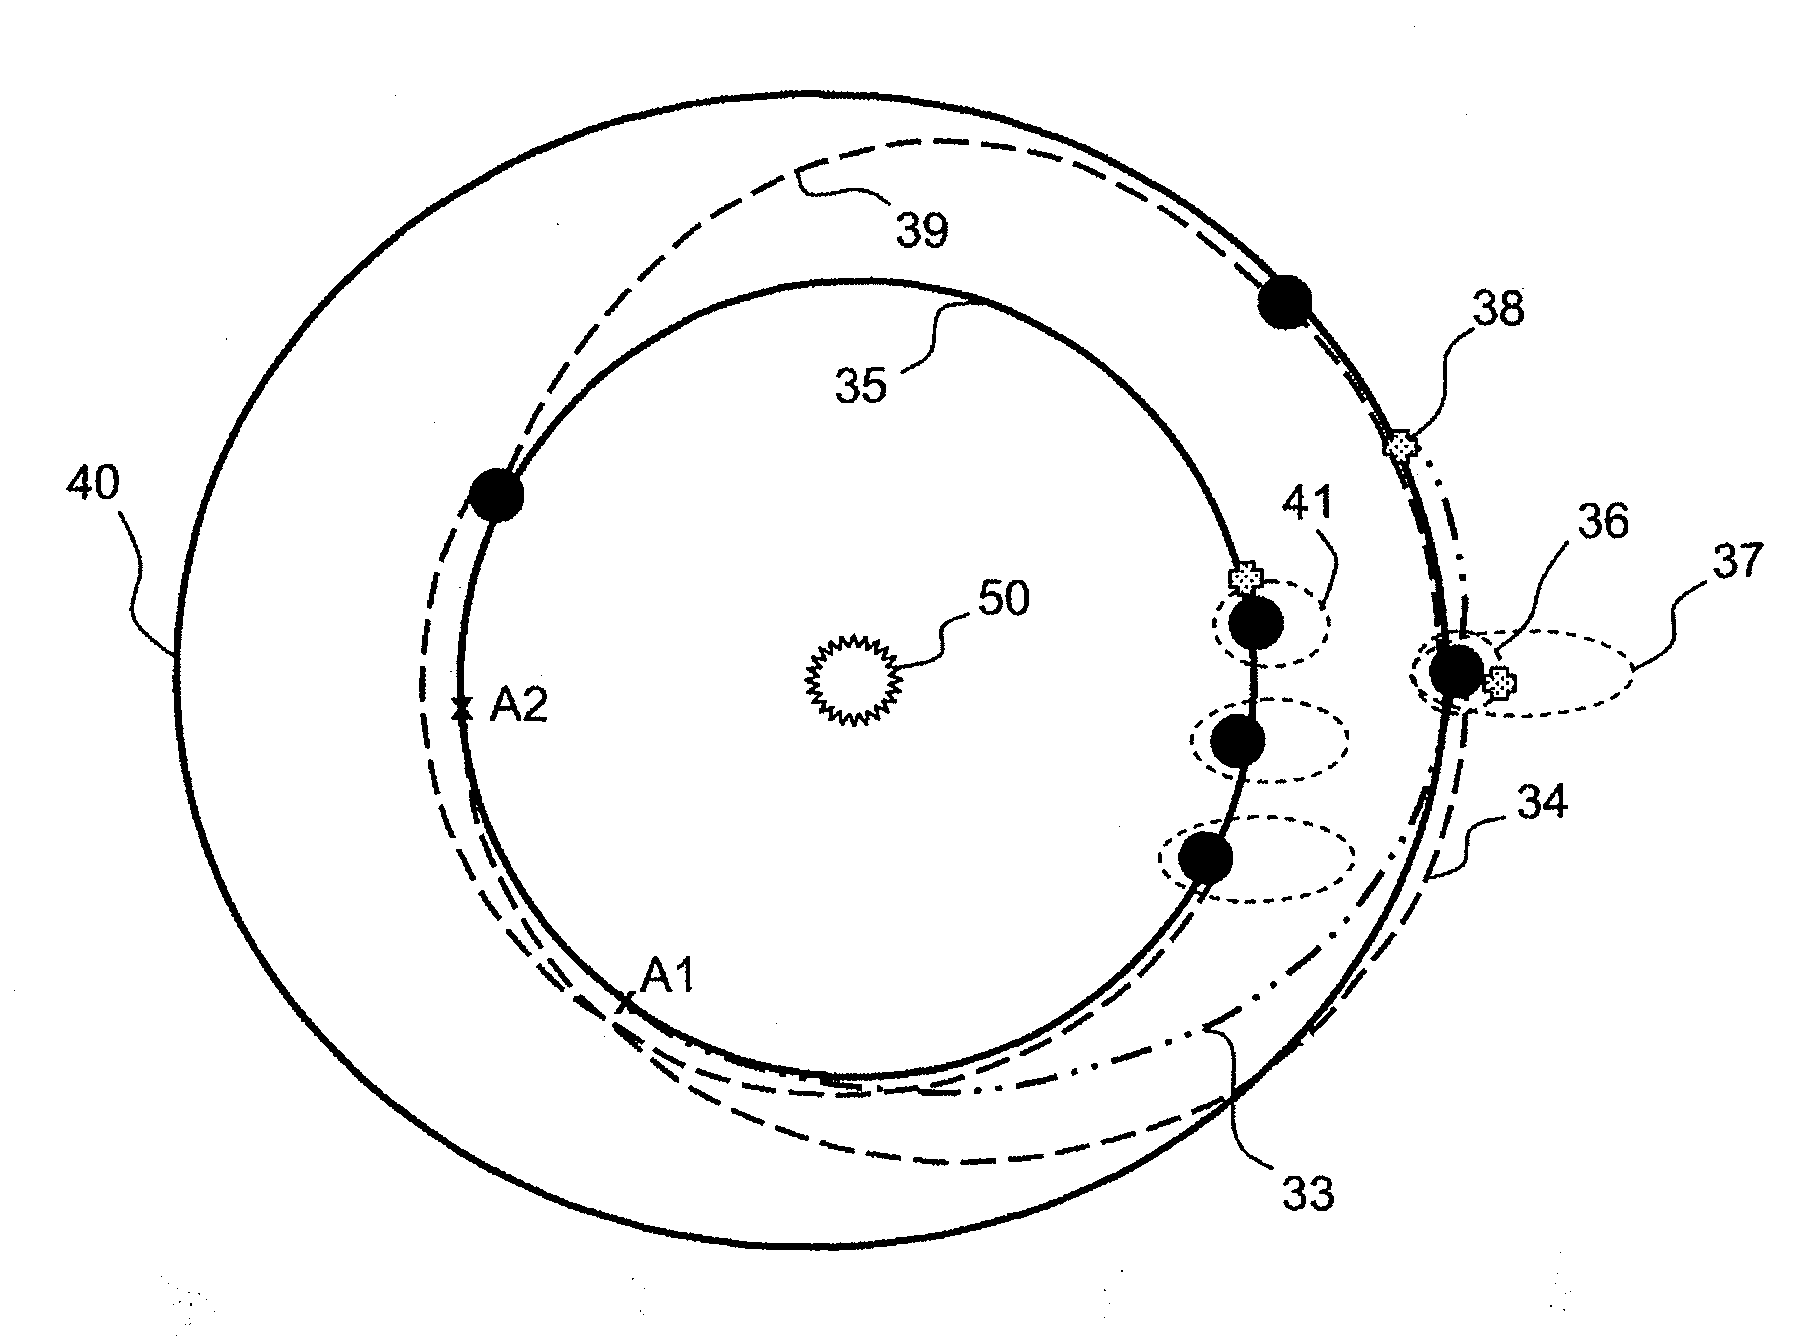 Method for Lightening the Weight of Fuel Stowed Onboard During an Interplanetary Mission